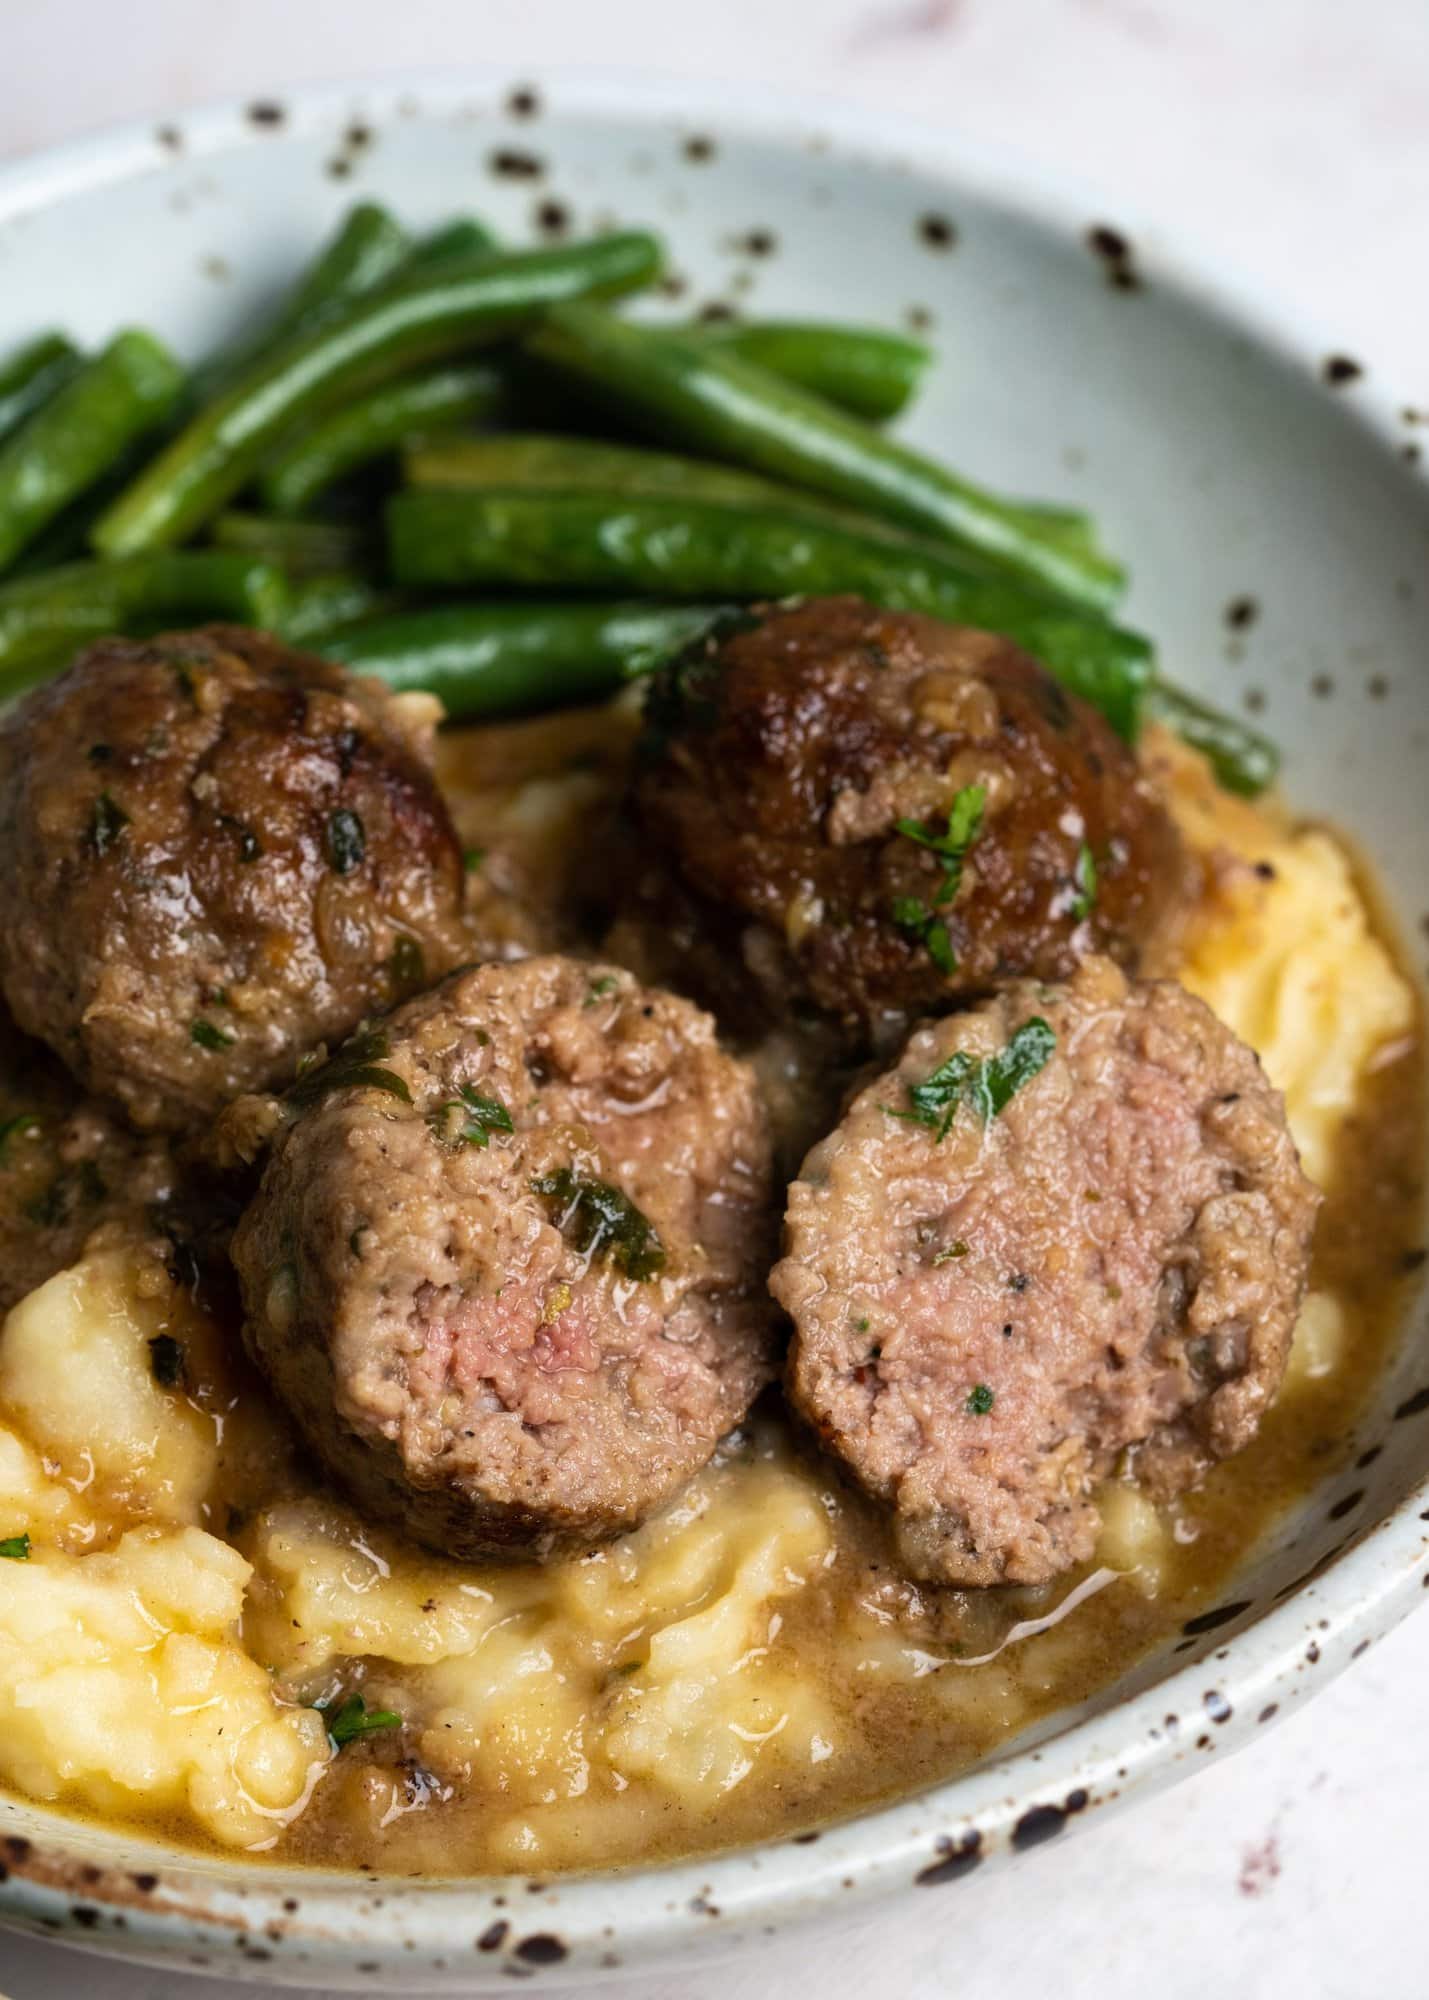 Meatballs sliced into half showing tender and juicy core on a bed of mashed potato.